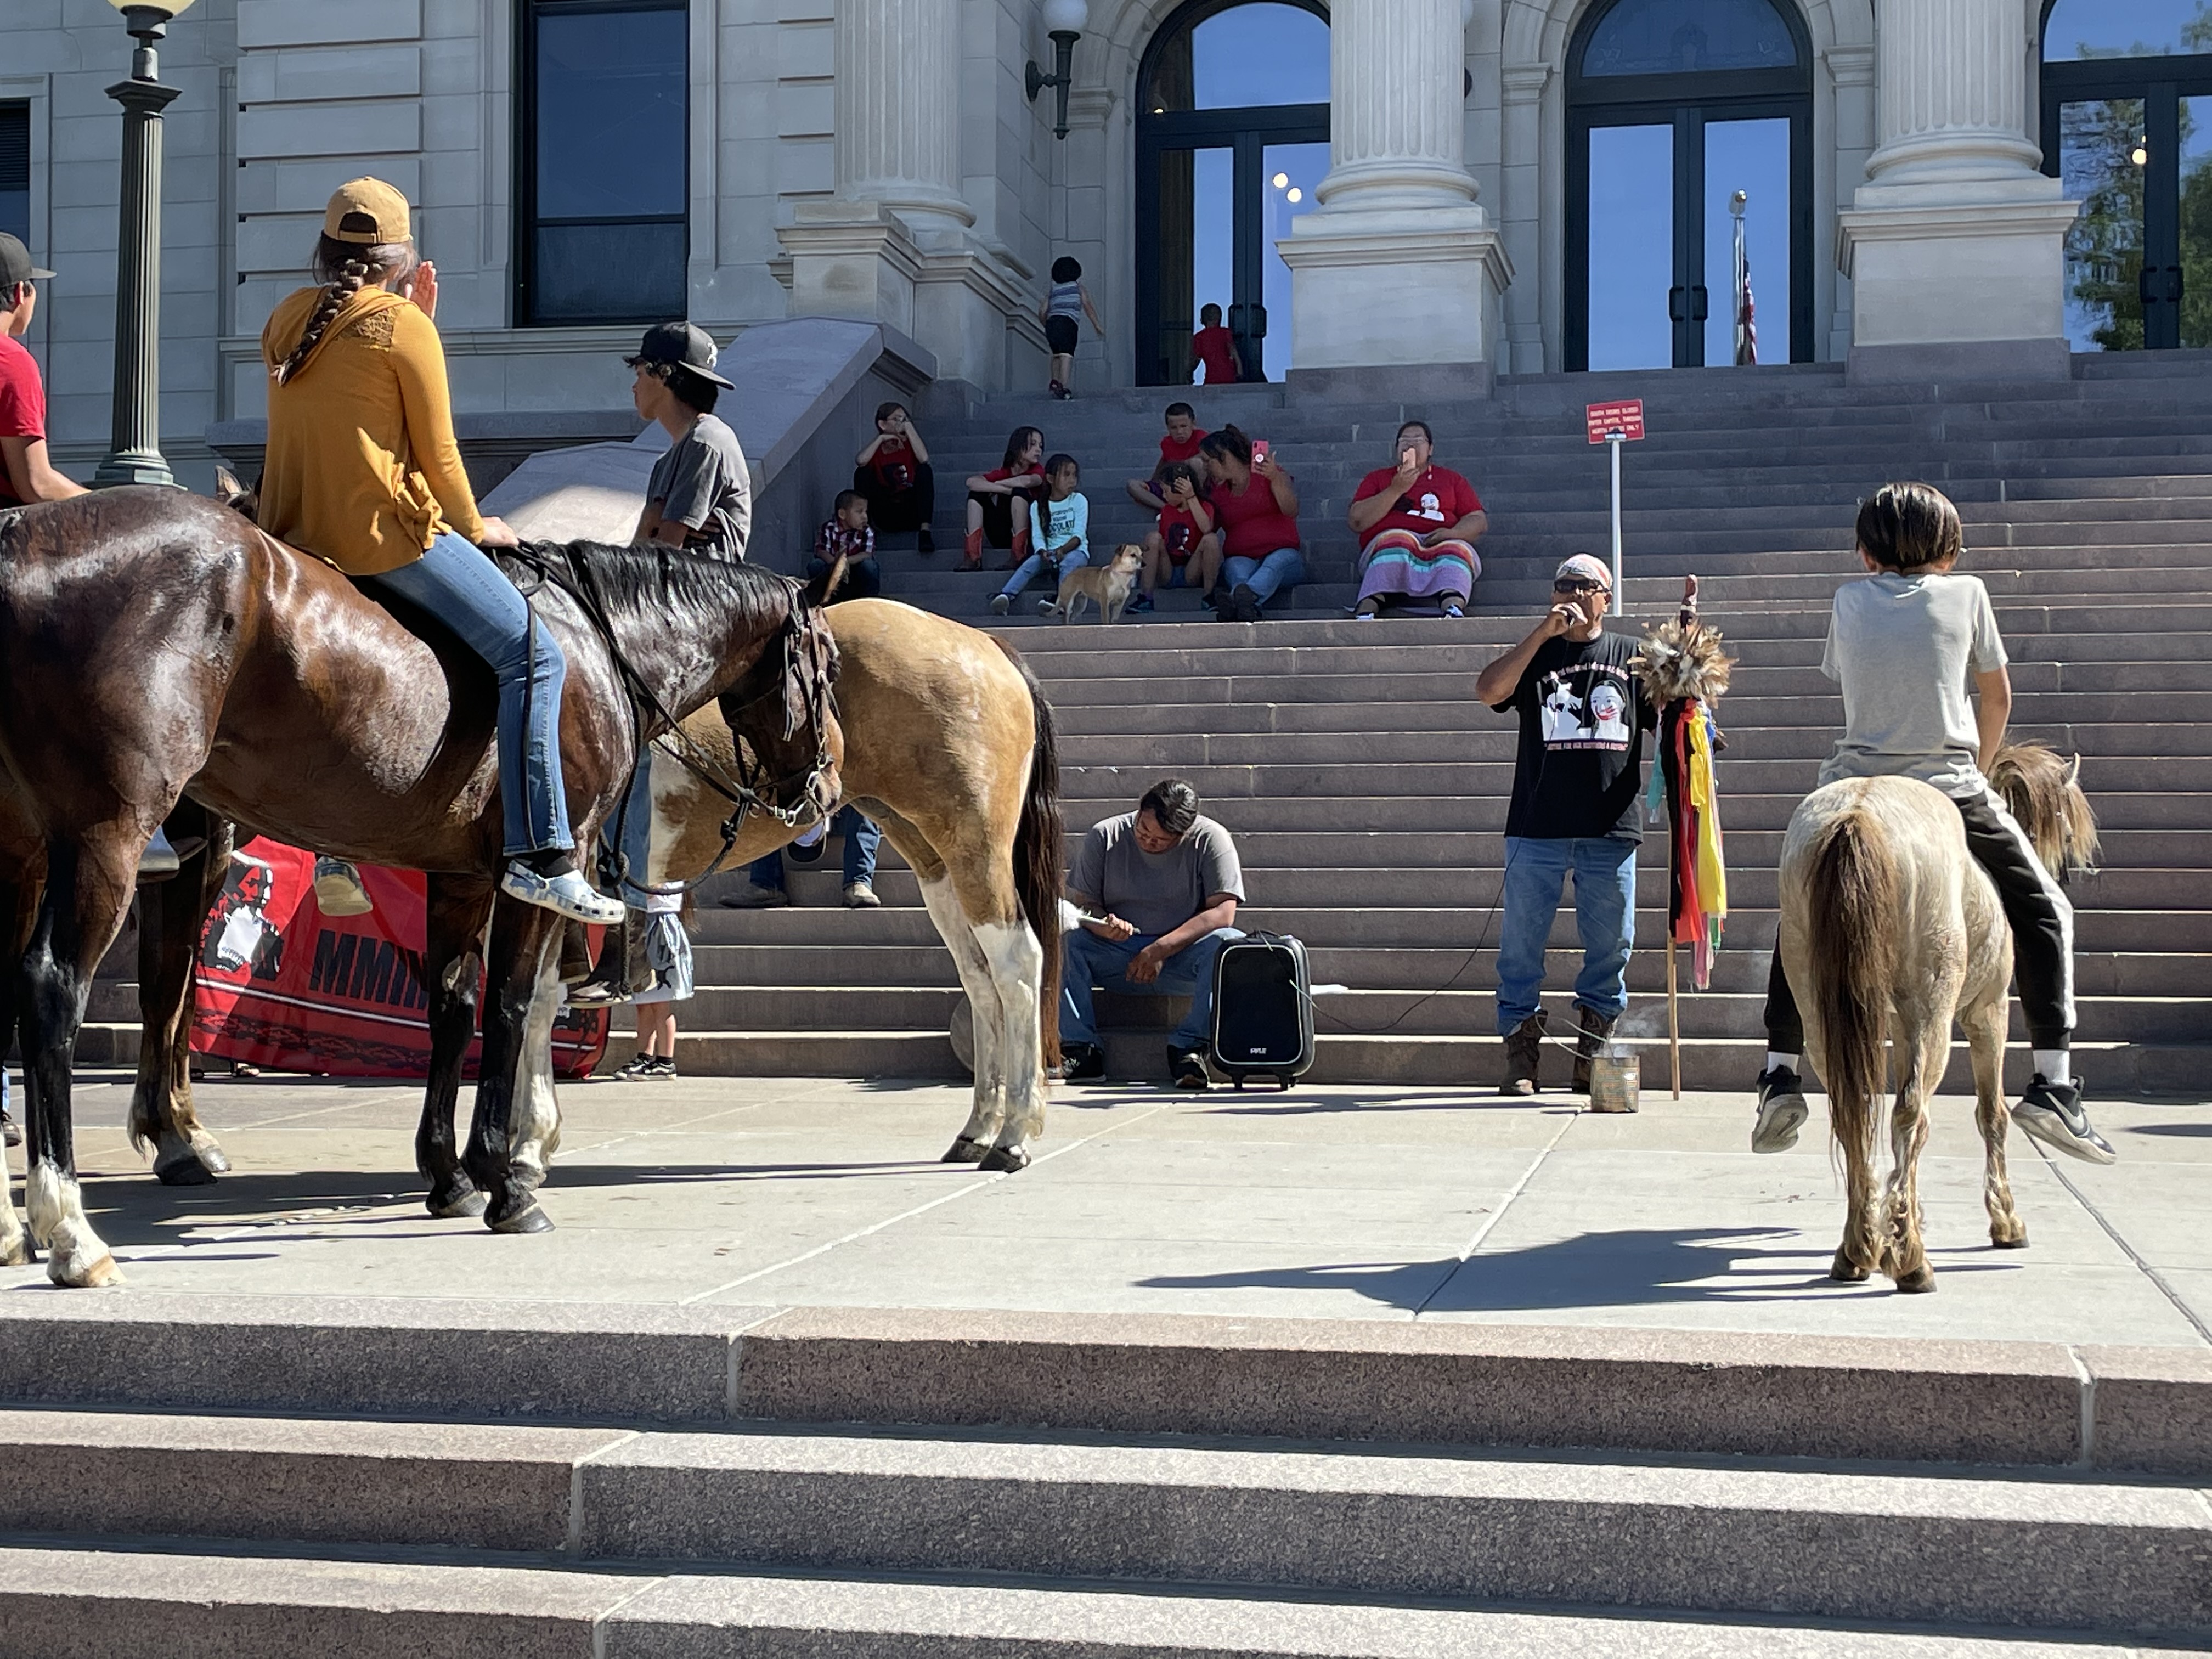 Seventh Annual Ride To Raise Awareness For Missing And Murdered Indigenous People Ends At State Capitol Friday